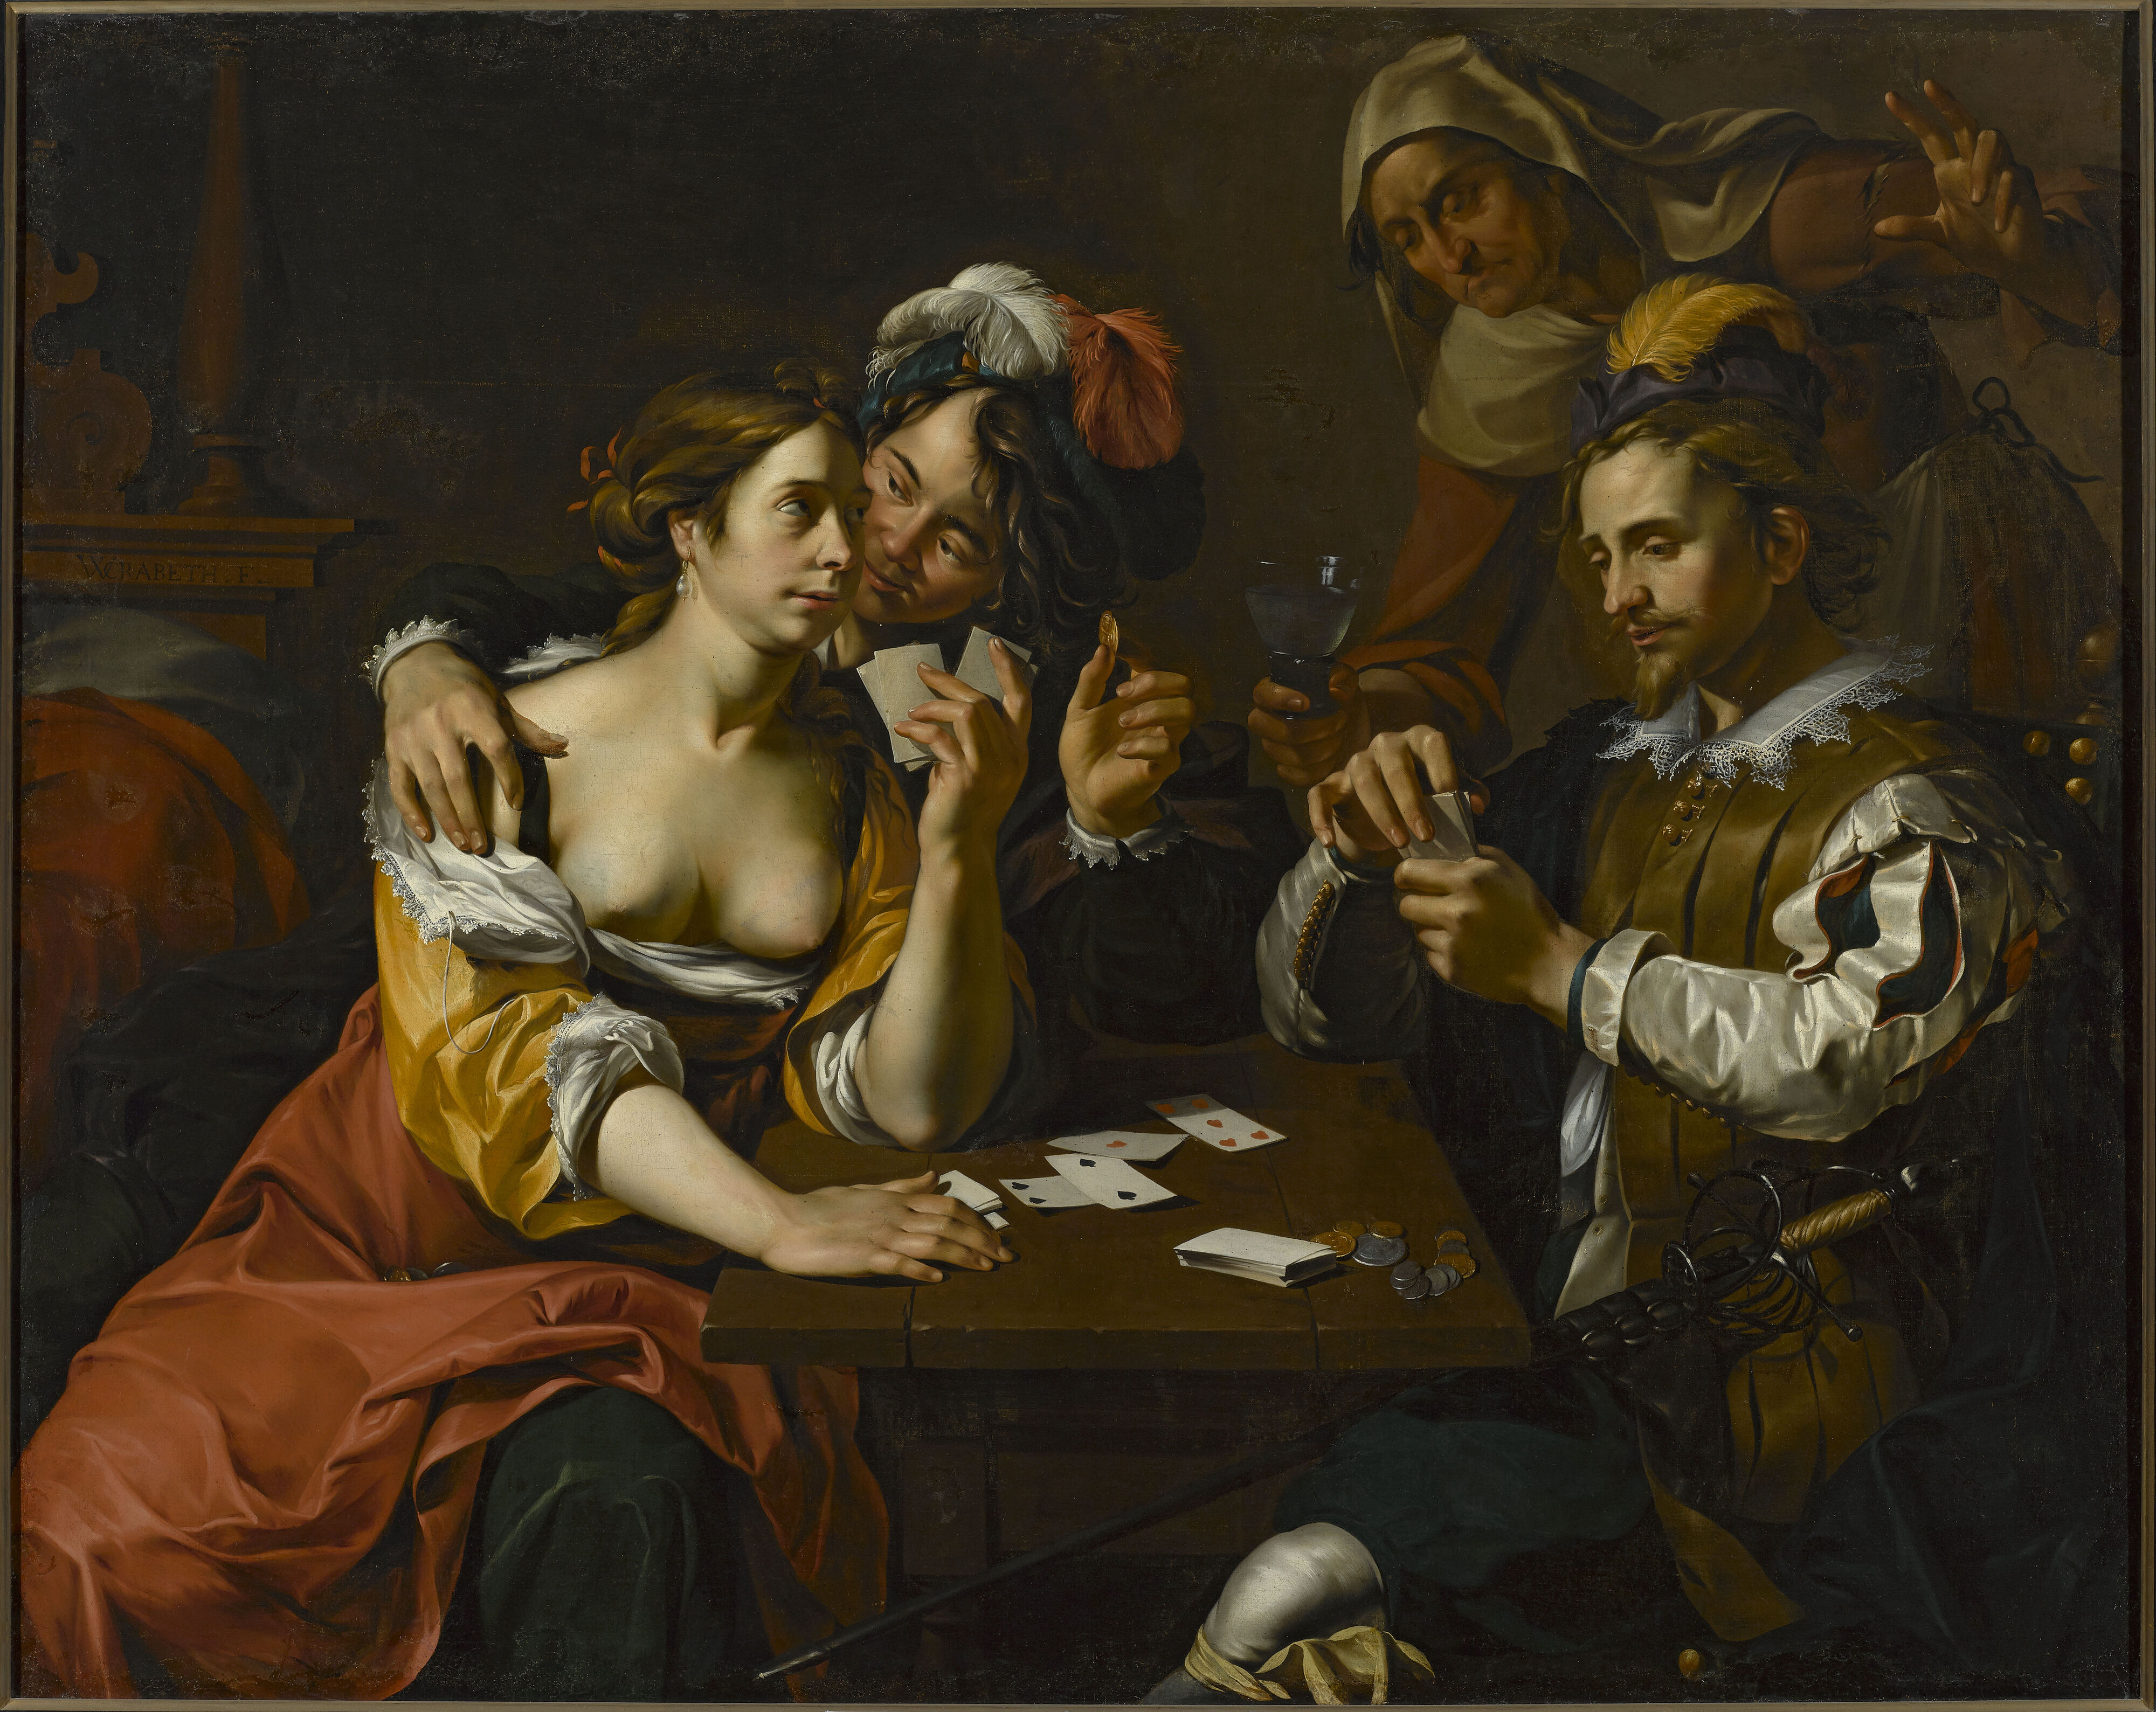 https://upload.wikimedia.org/wikipedia/commons/9/92/Wouter_Pietersz._Crabeth_II_-_Playing_cards_-_M.Ob.531_-_National_Museum_in_Warsaw.jpg